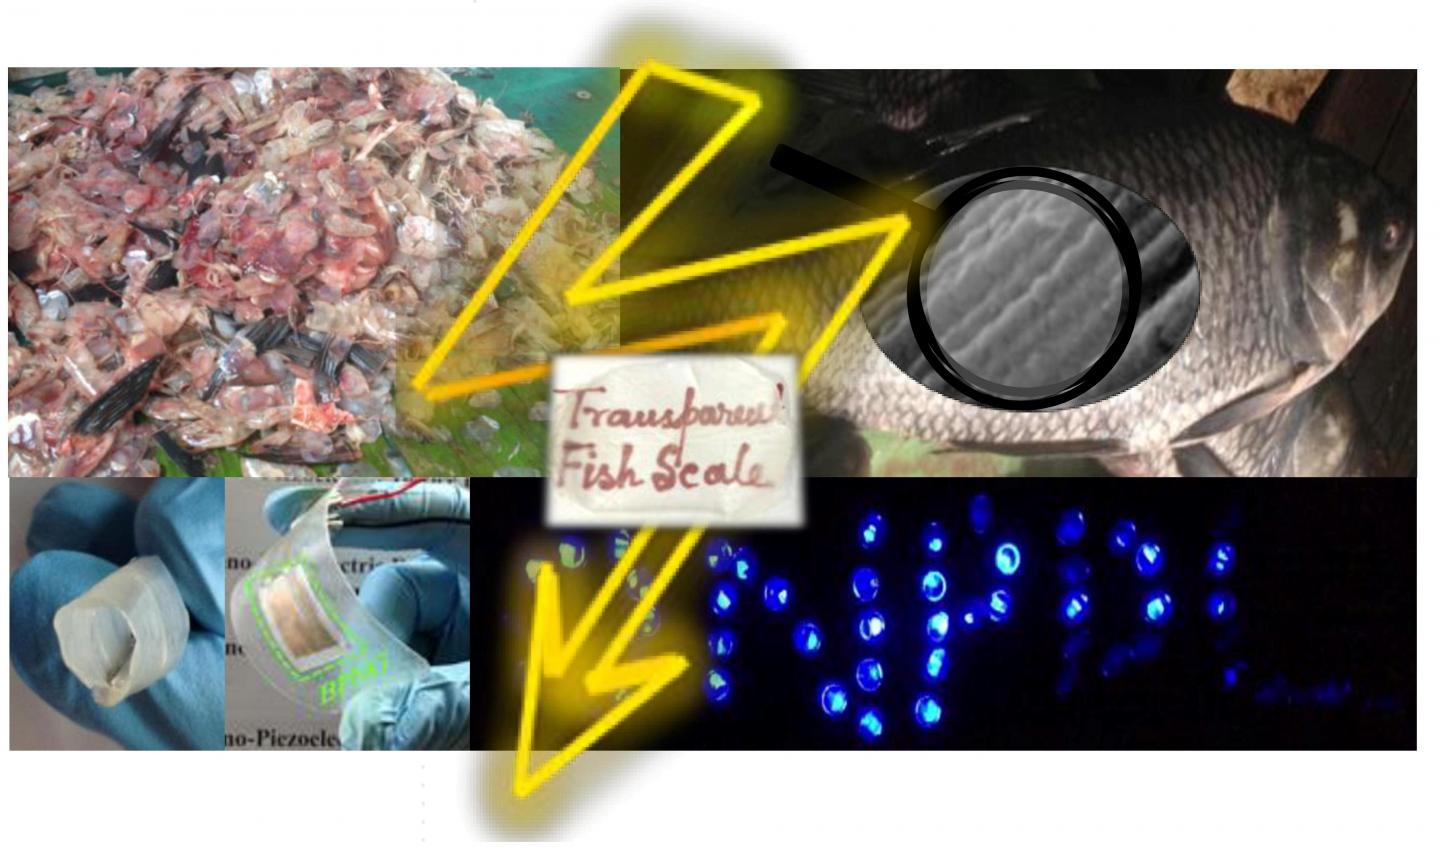 Caption: Waste fish scales (upper left corner) are used to fabricate flexible nanogenerator (lower left) that power up more than 50 blue LEDs (lower right). An enlarged microscopic view of a fish scale shows the well-aligned collagen fibrils (upper right). The possibility of making a fish scale transparent (middle) and rollable (extreme left lower corner) is also illustrated. Credit: Sujoy Kuman Ghosh and Dipankar Mandal/Jadavpur University